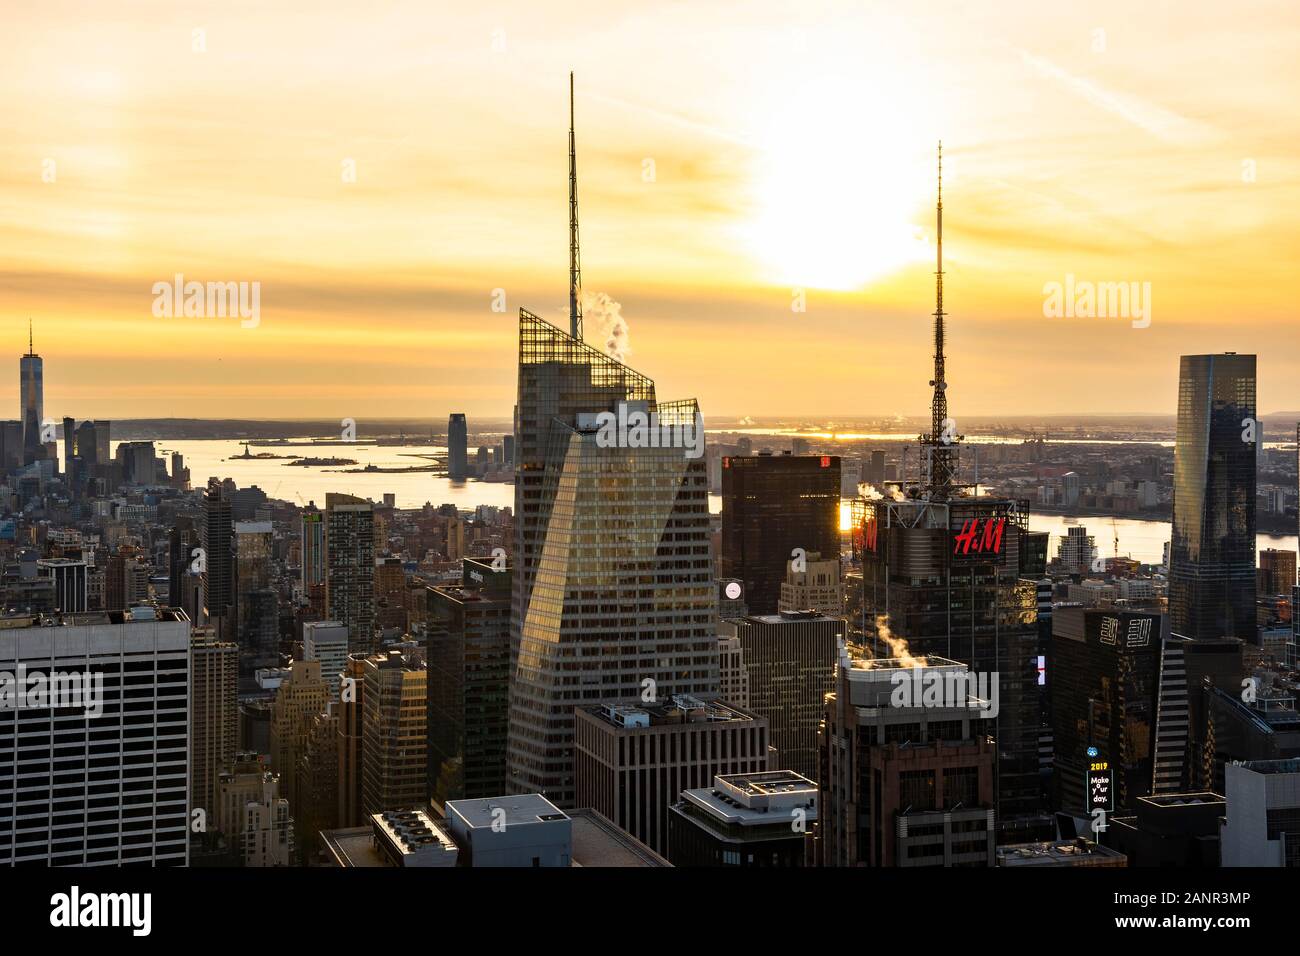 Manhattan, New York, NY, USA - November 30, 2019. New york City architecture with Manhattan skyline at dusk from Top of the Rock, Rockefeller Center . Stock Photo